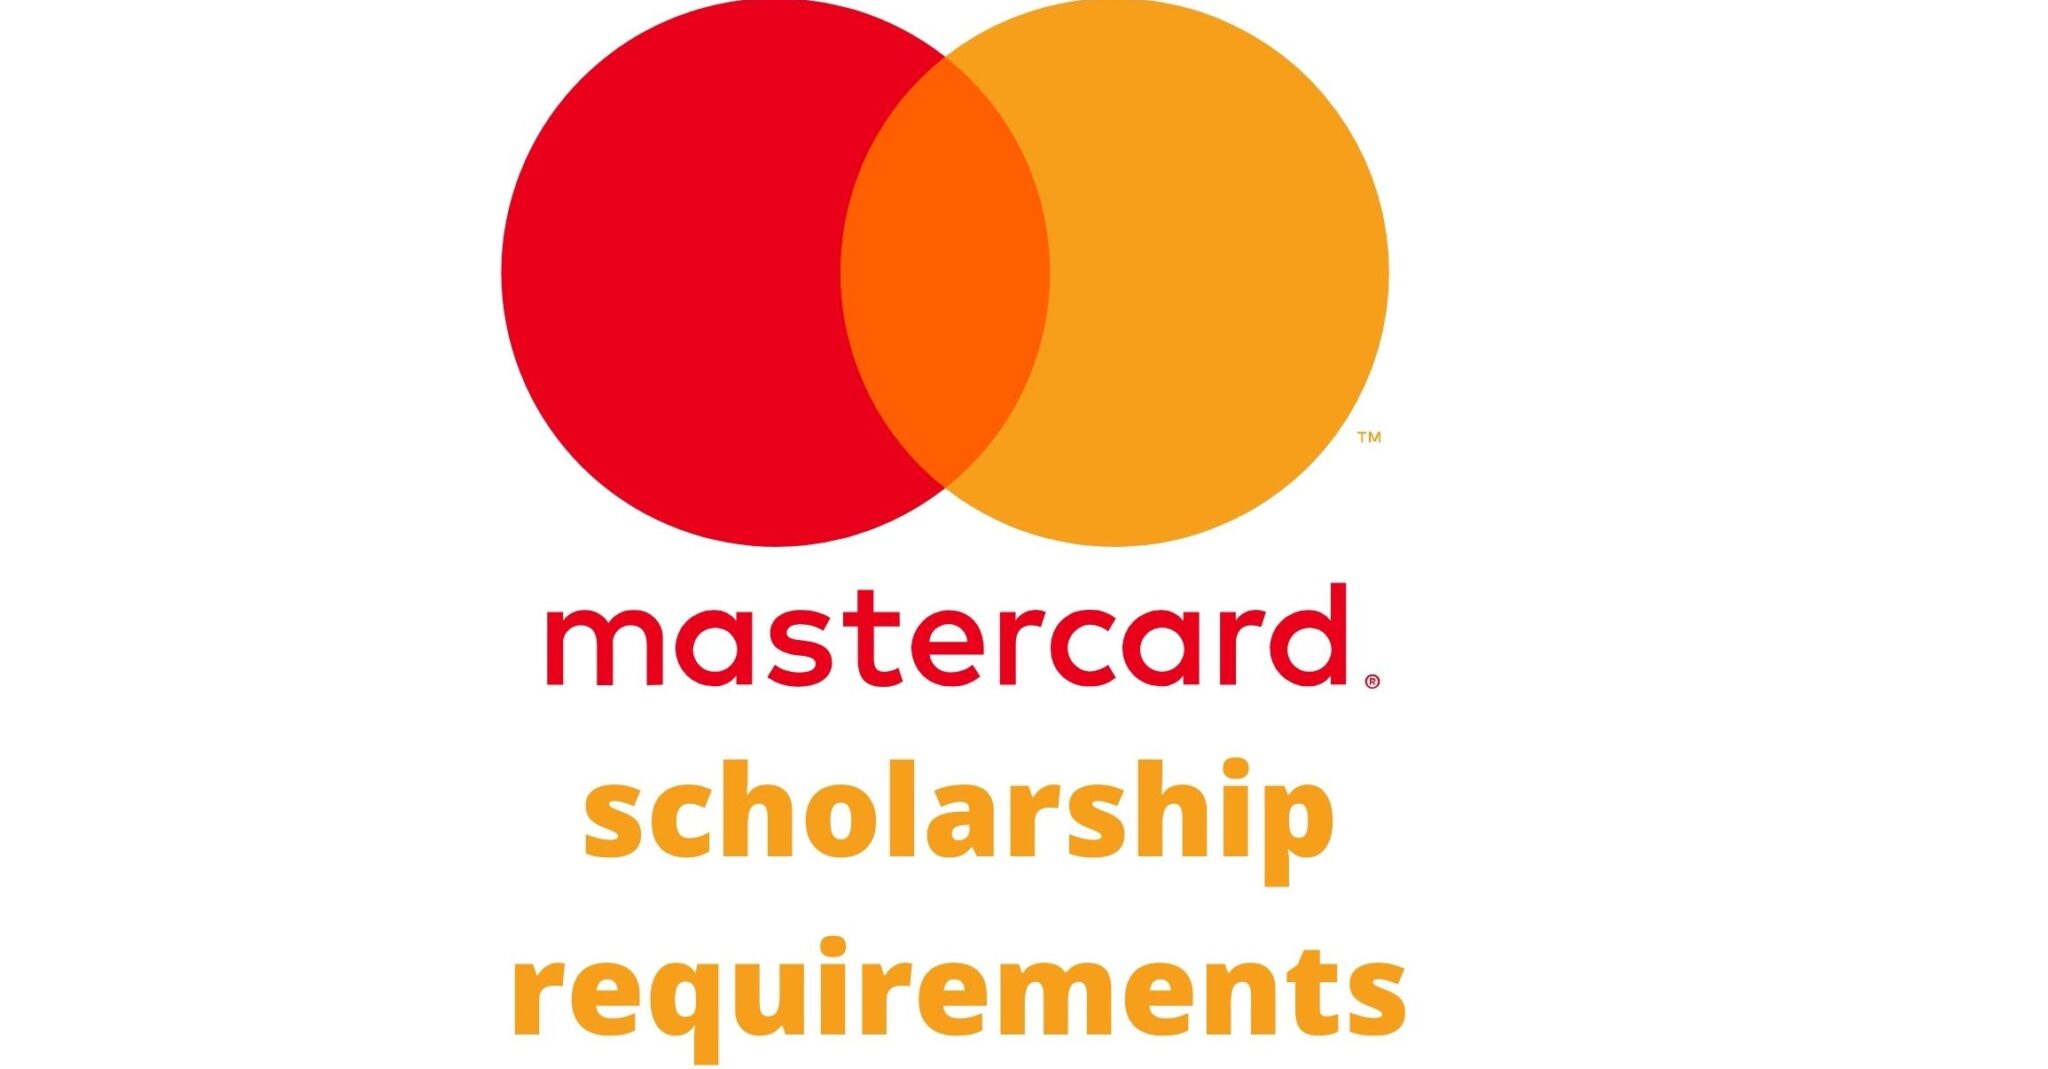 What Are The Requirements For MasterCard Scholarship Ongoing 2022